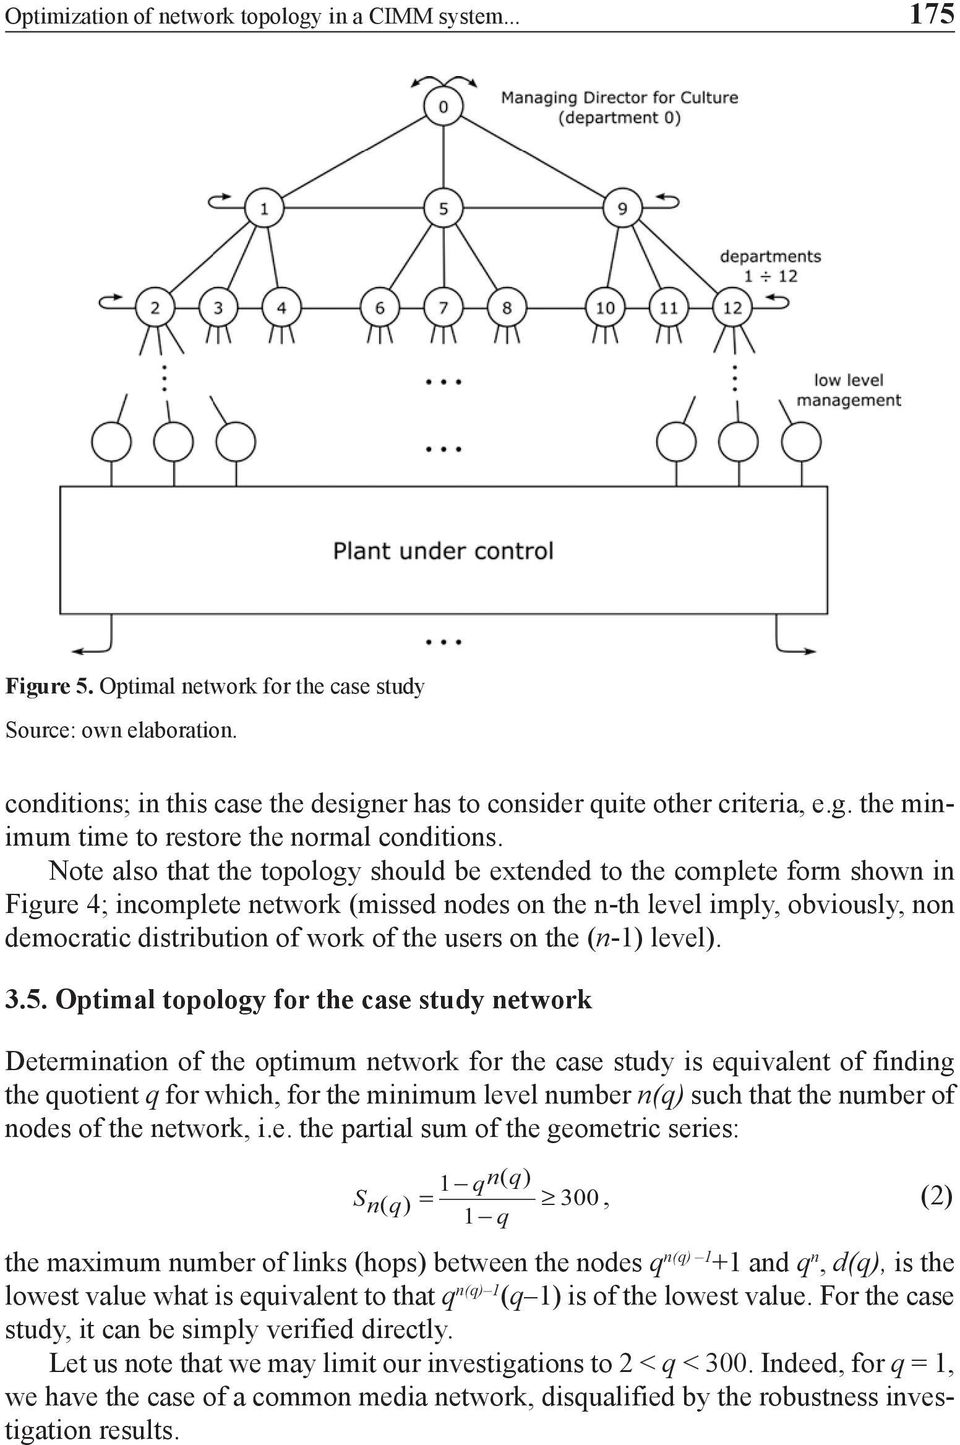 Note also that the topology should be extended to the complete form shown in Figure 4; incomplete network (missed nodes on the n-th level imply, obviously, non democratic distribution of work of the